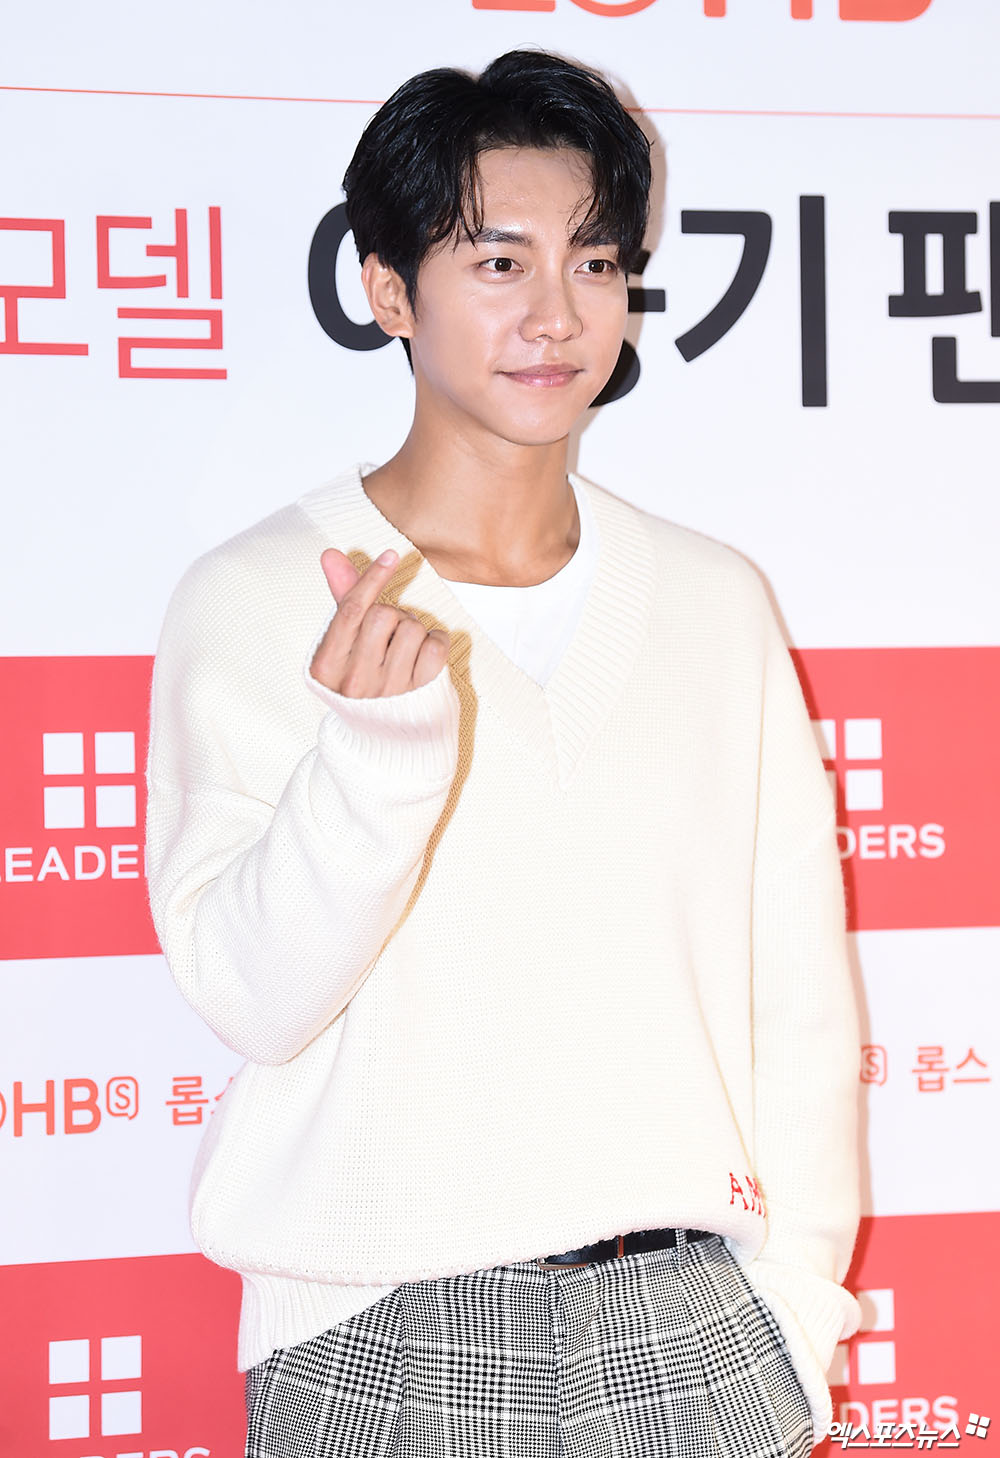 Actor Lee Seung-gi poses at a fan signing event of a more cosmetic brand held at the Itaewon Lops store in Seoul Yongsan District on the afternoon of the 26th.